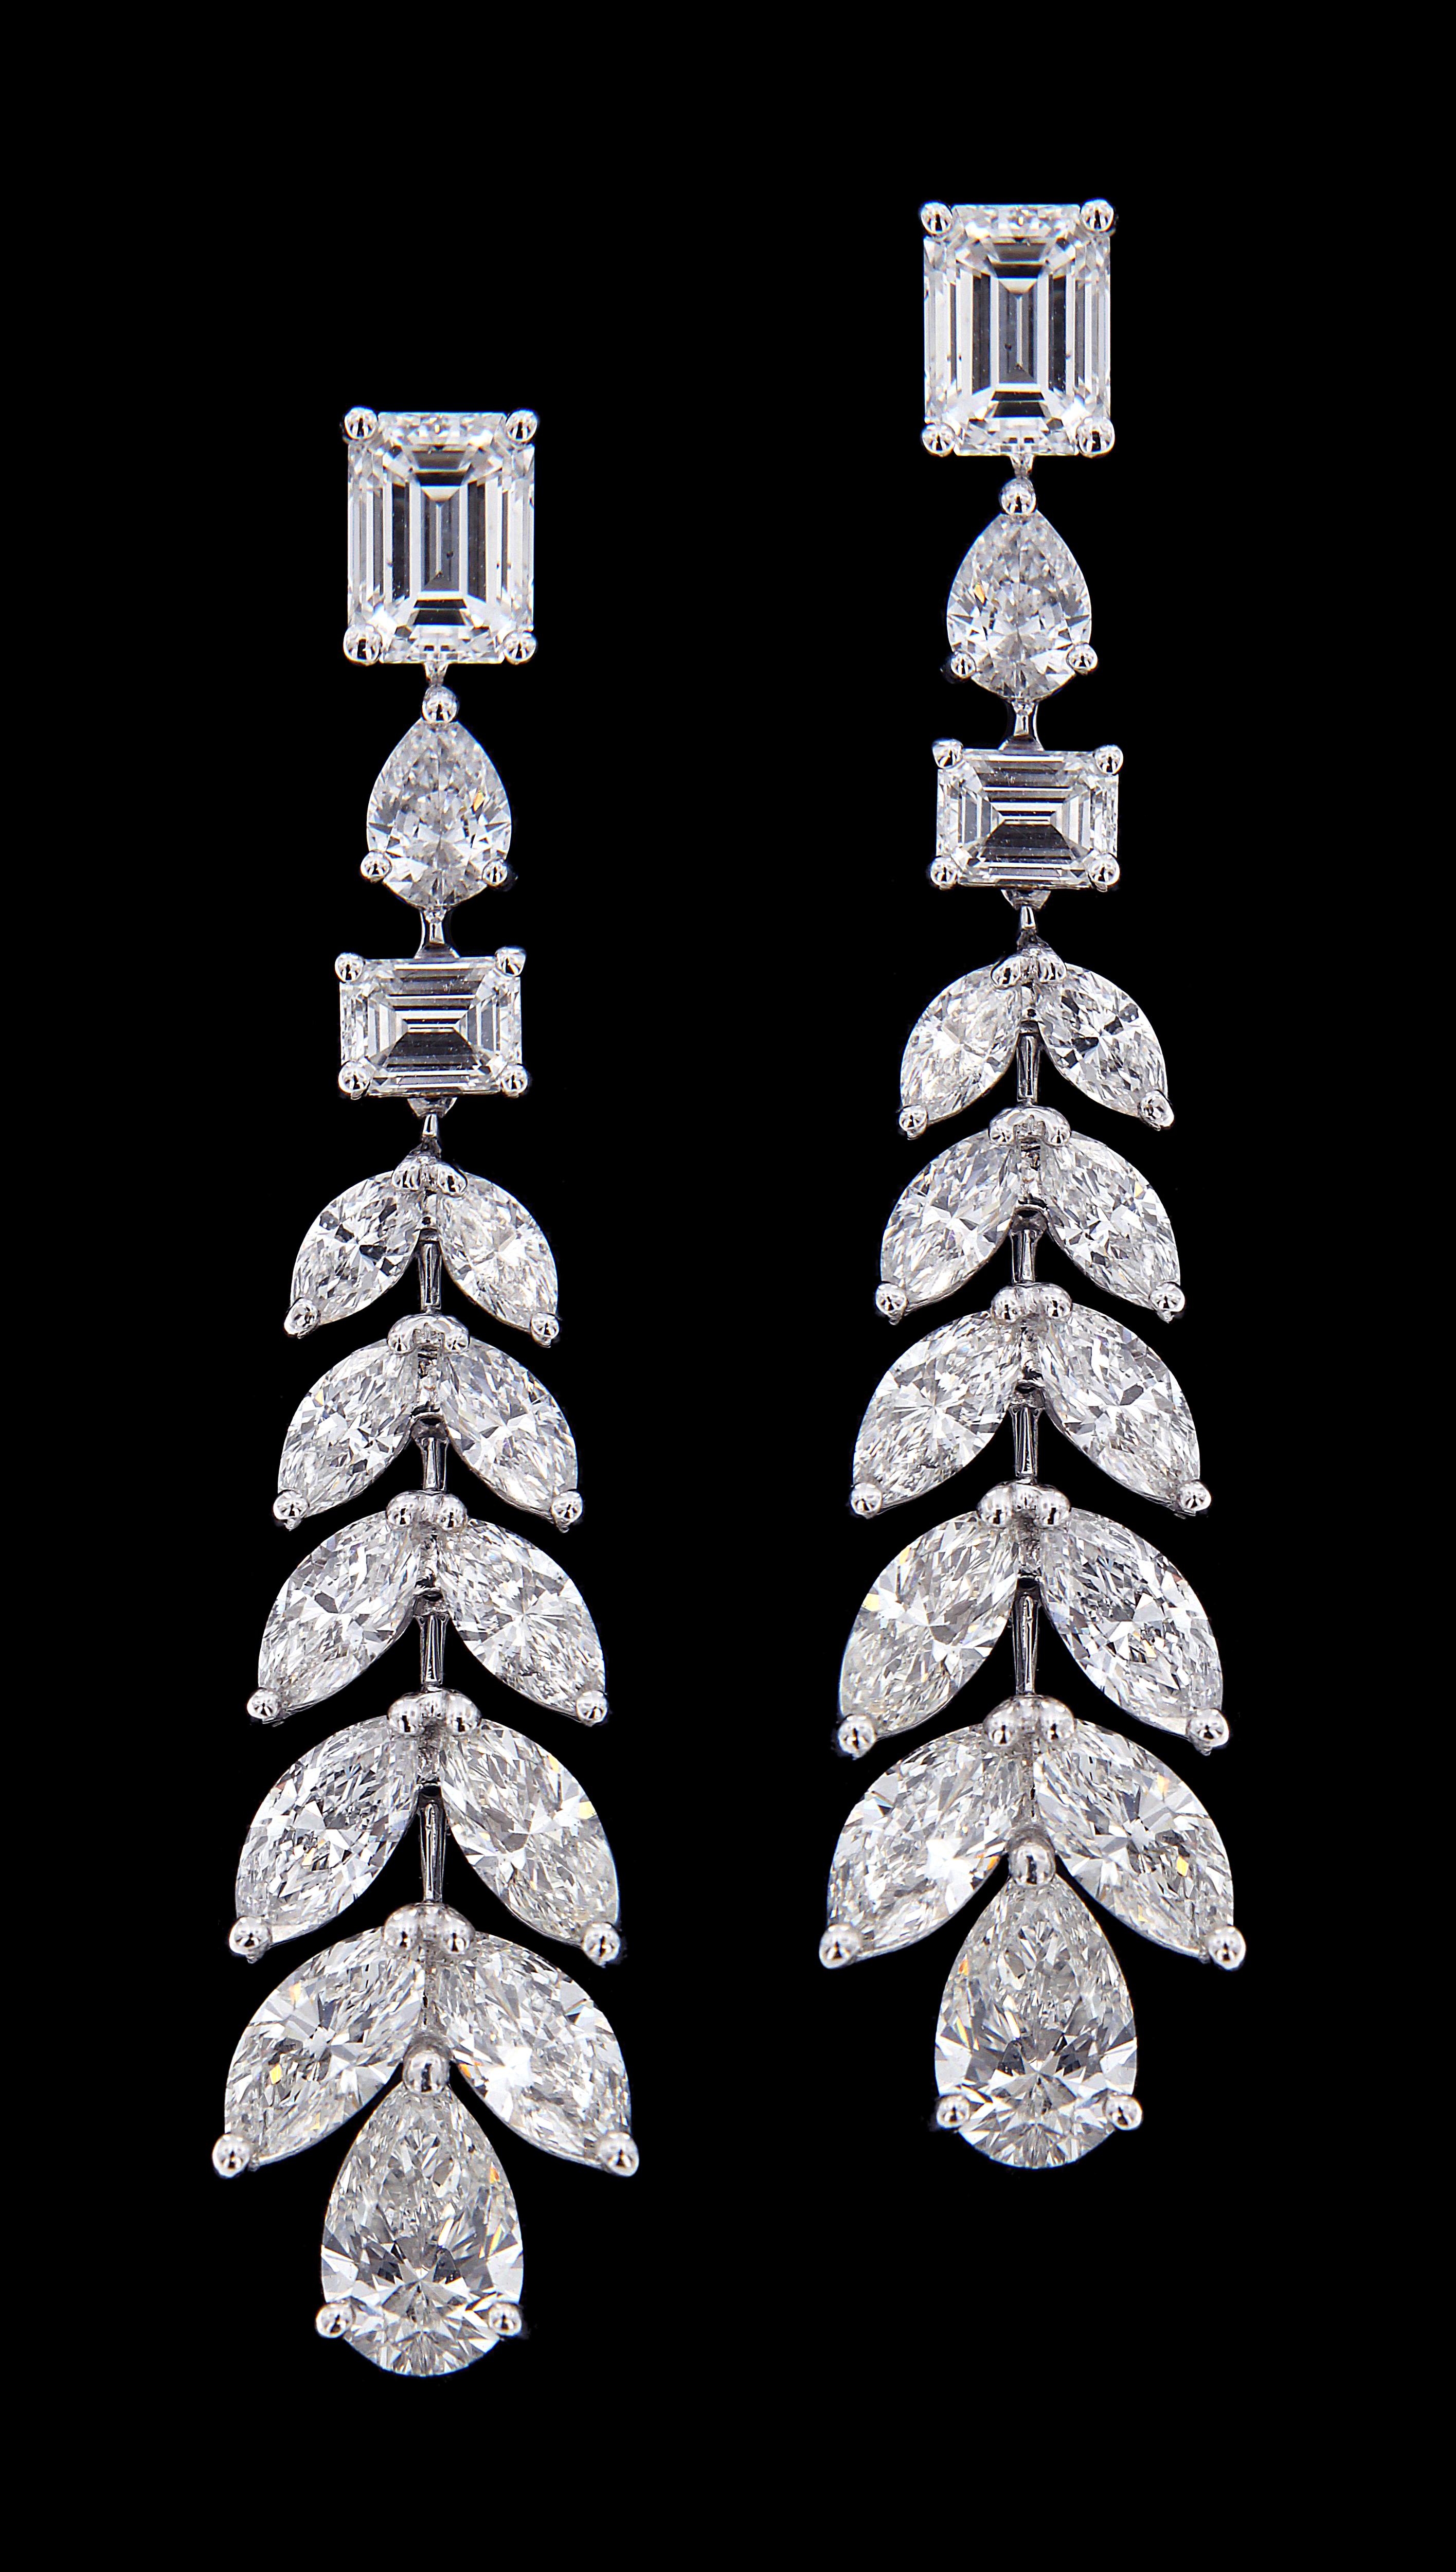 Sumptuous White Gold And Diamond Wedding  Set :
 
Earrings:
Multi shaped Diamonds weighing approximately around 8.153 carats, mounted on 18 karat white gold earring. The earring weighs around 8.669 grams approximately.  


Please note: The prices